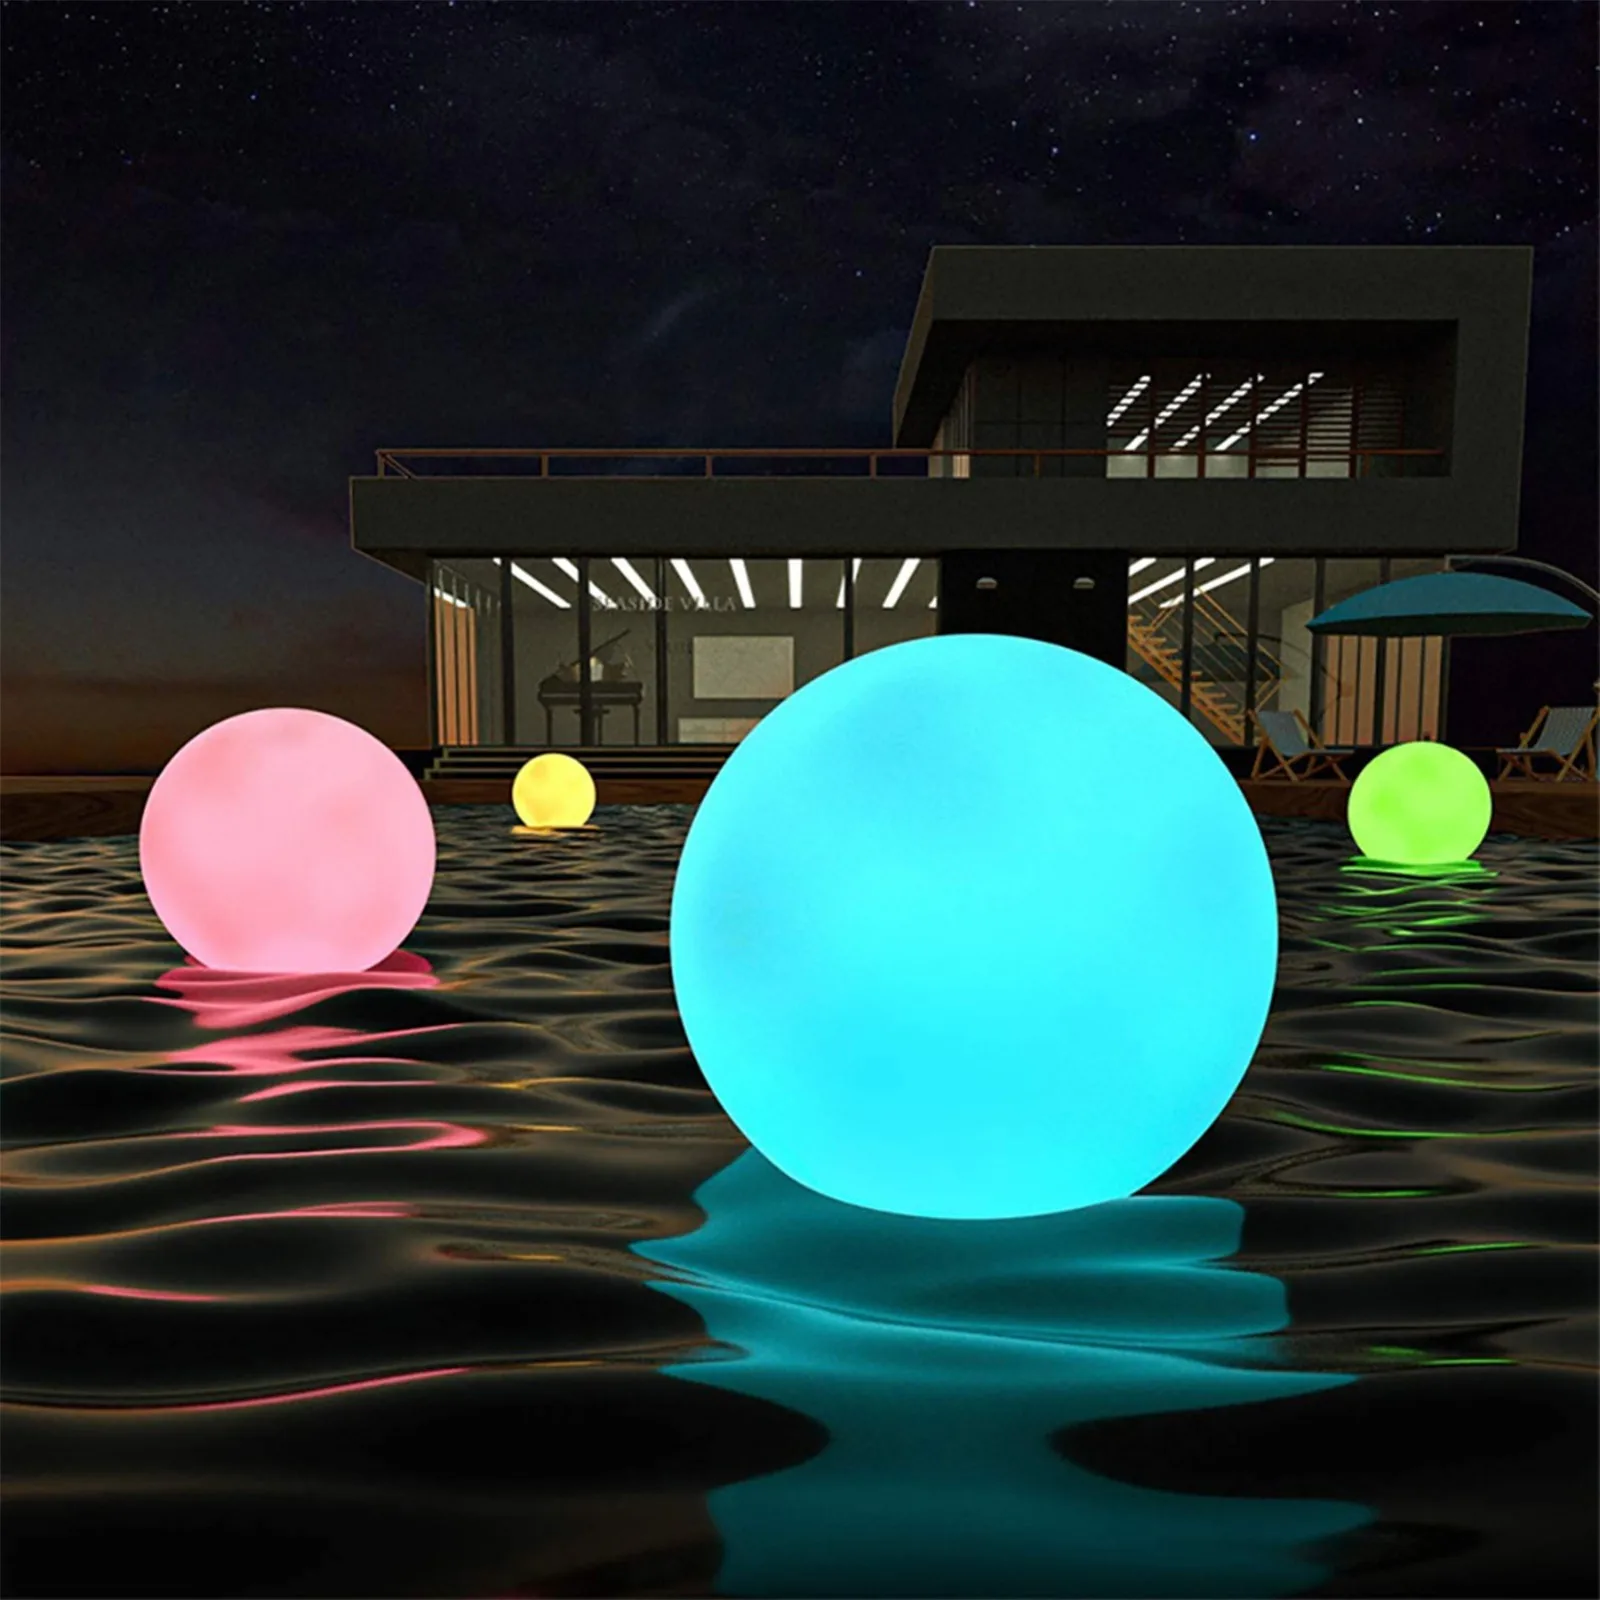 16 Colors 4 Lighting Modes LED Beach Ball 16 Inflatable Pool Toy with Remote Patio Garden Backyard Decor Glowing Outdoor Beach Pool Party Games Water Toy Pool Accessories for Kids Adults 